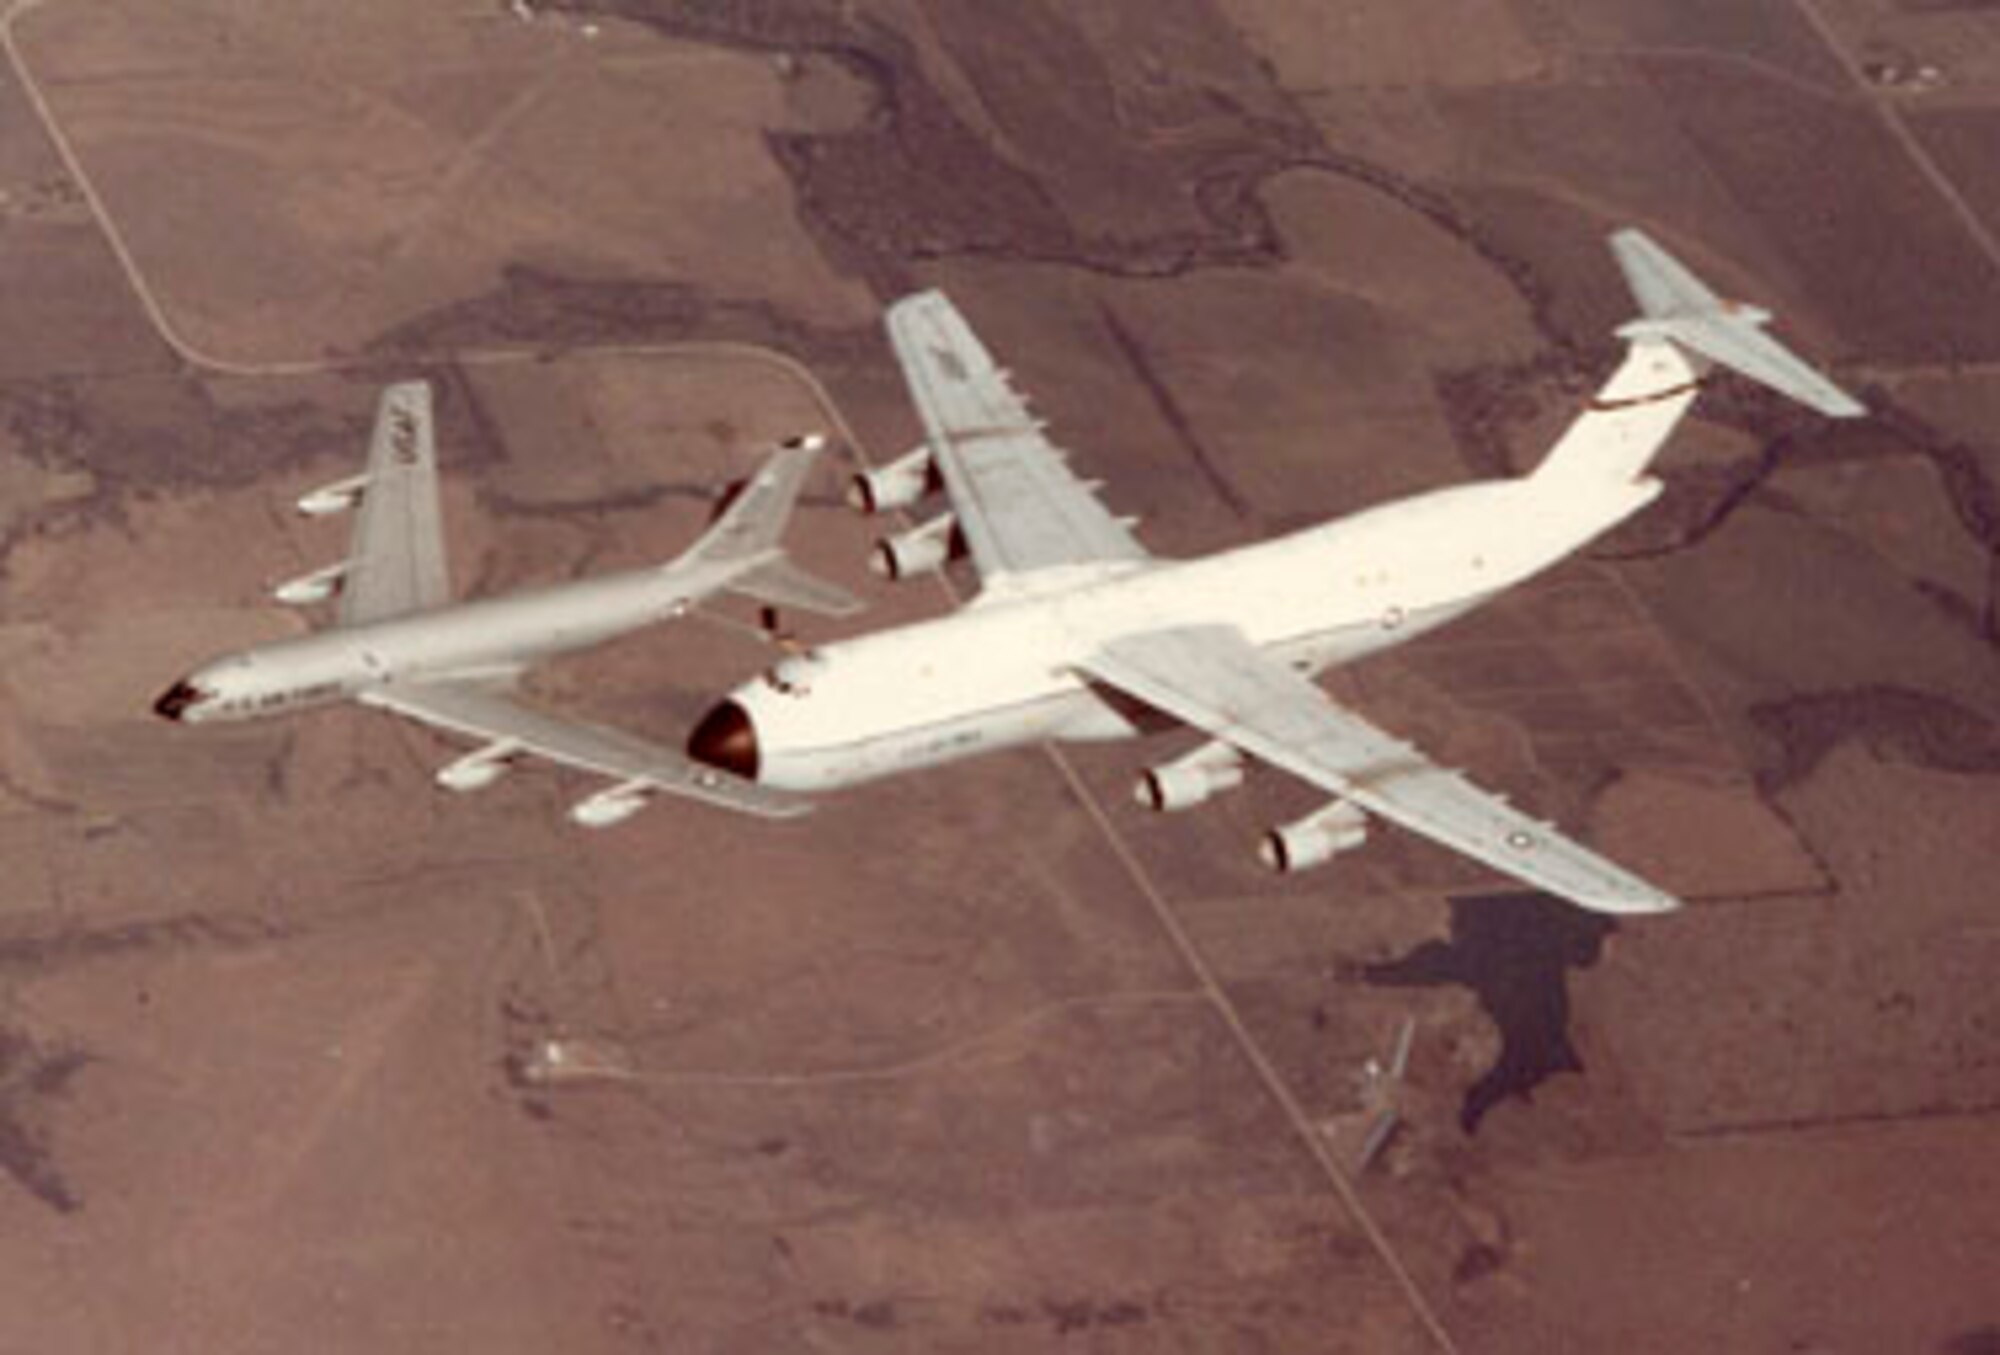 A KC-135 Stratotanker refuels a C-5 Galaxy, both stationed at Altus Air Force base in the 1960’s. KC-135s have been stationed in Altus AFB since 1958 and the C-5 served at Altus as an air mobility squadron and formal training unit for a total 38 years. (Courtesy Photo)